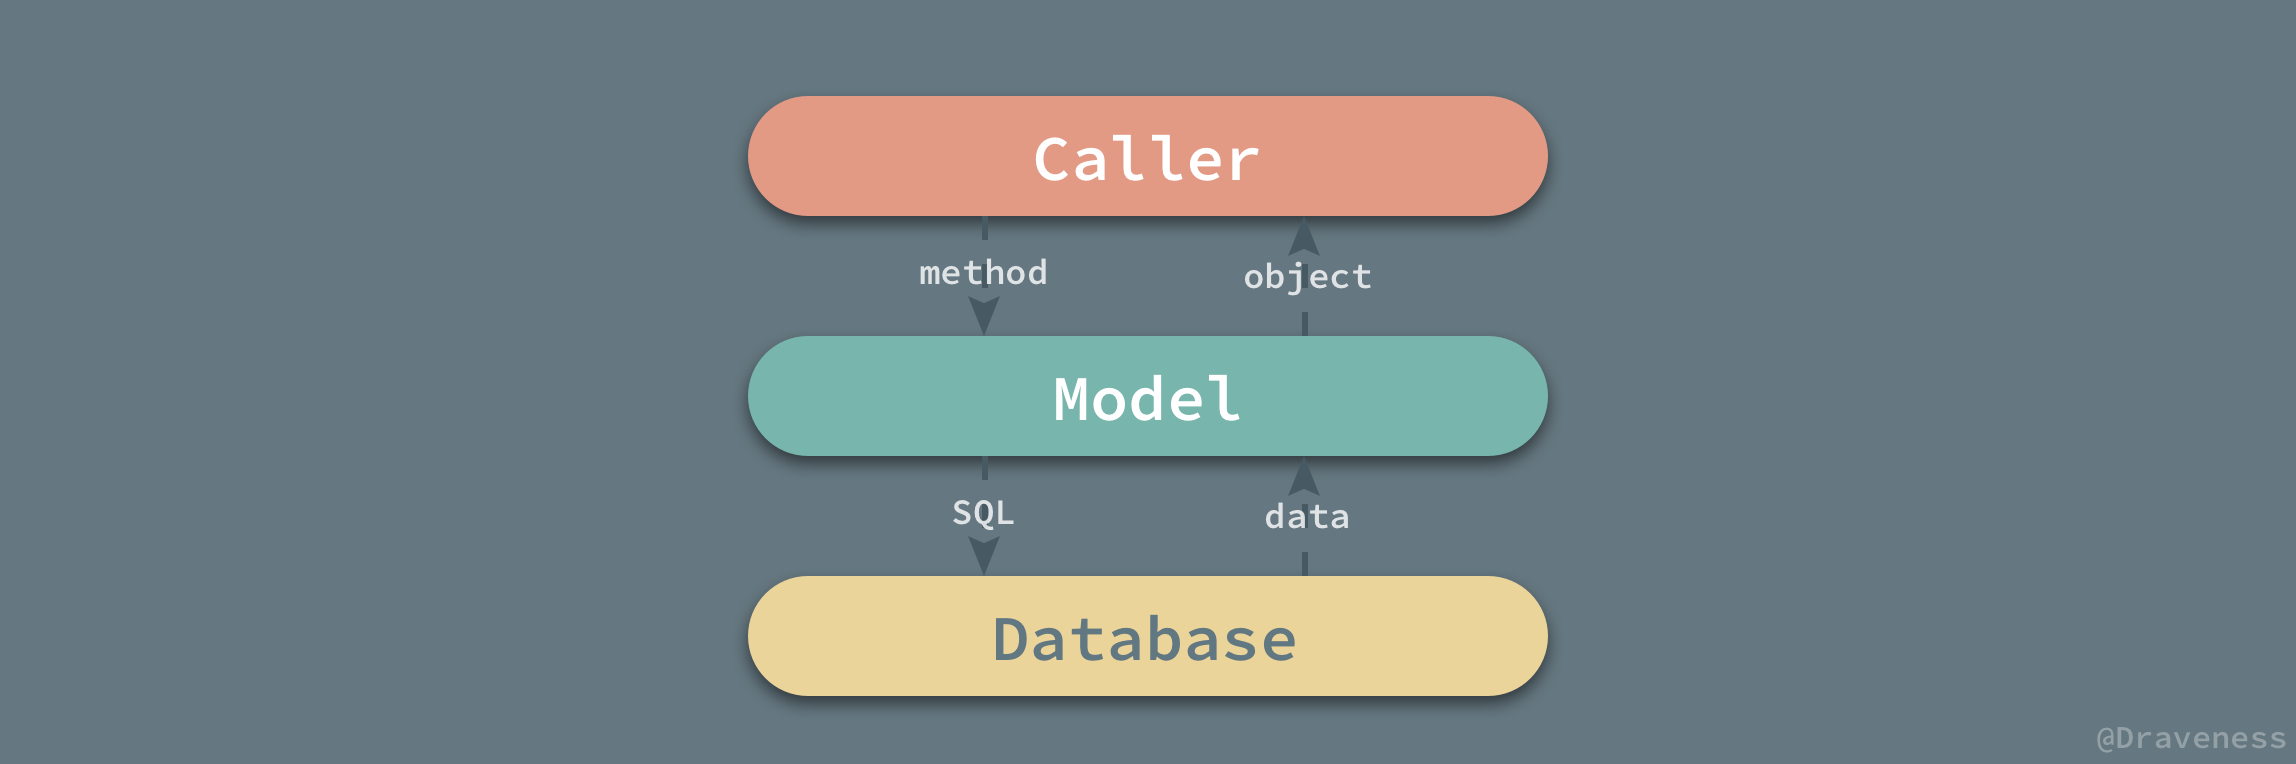 Relation-Between-Database-And-Mode